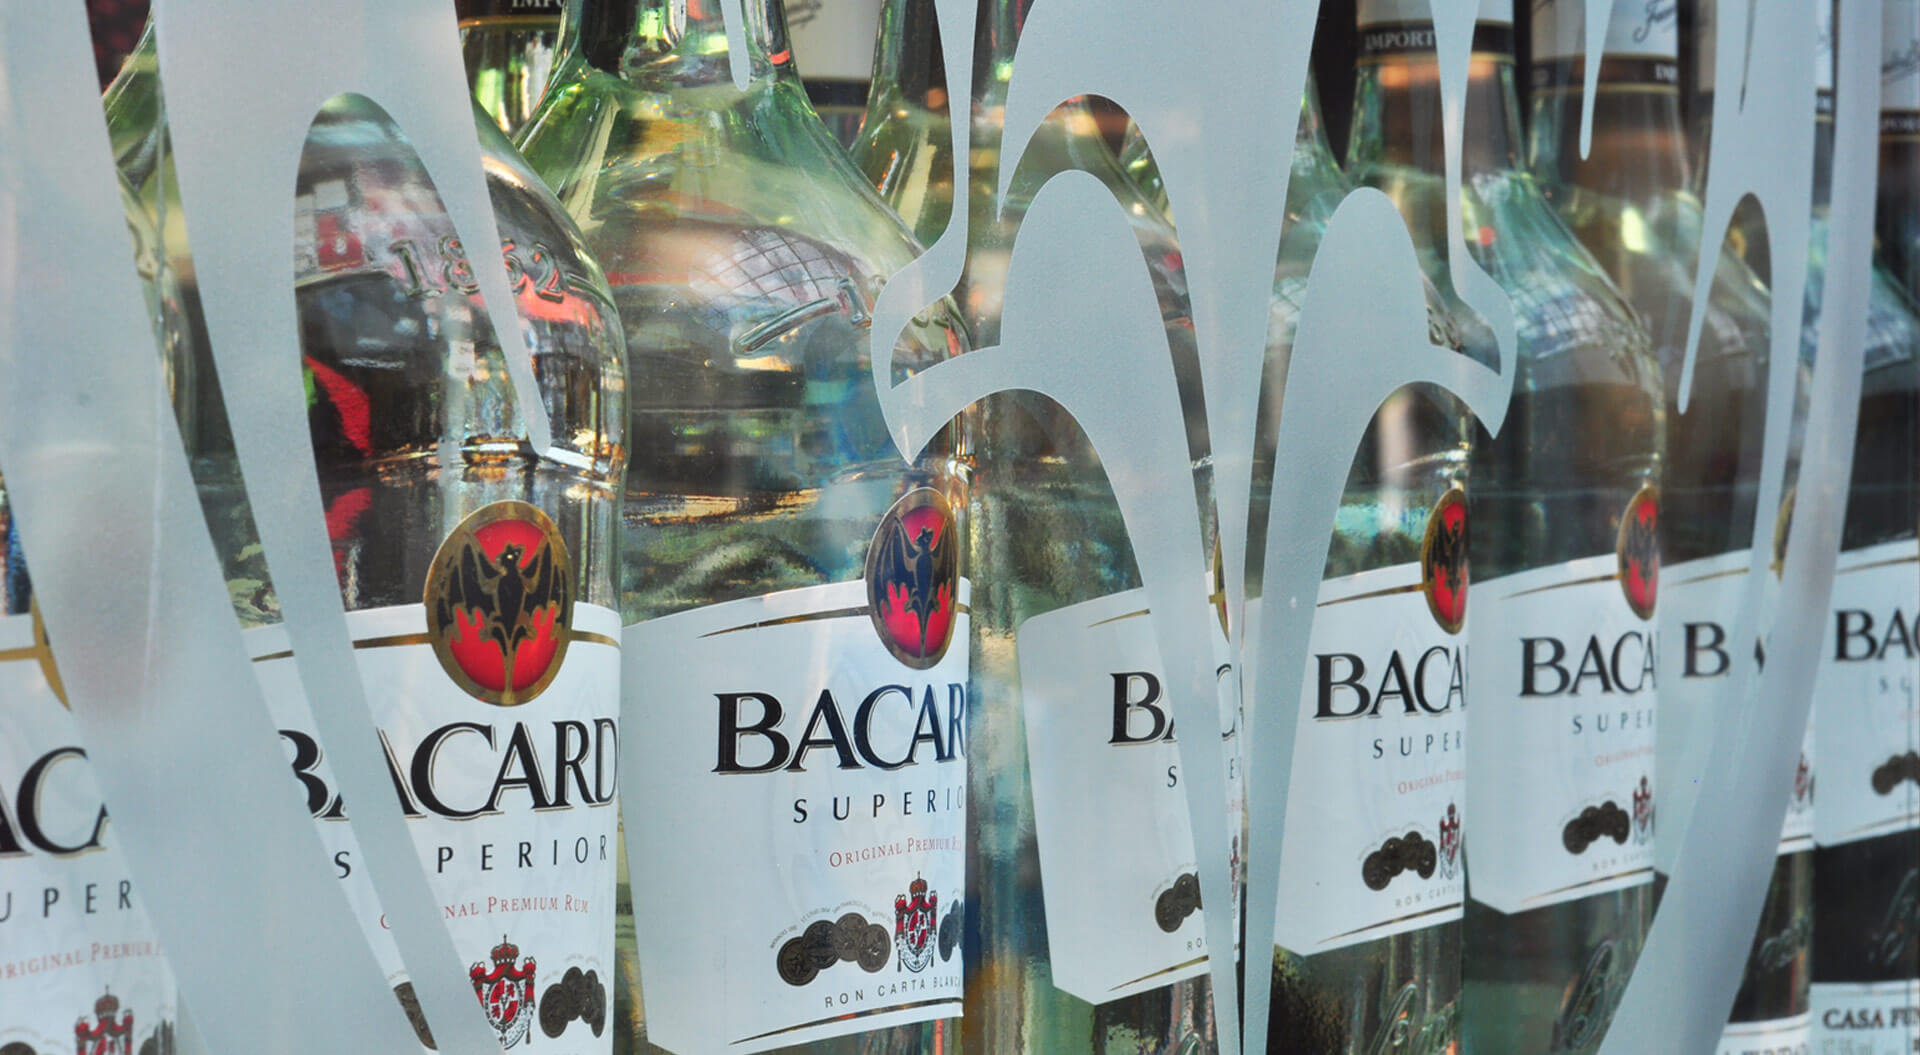 Bacardi Mojito Global Travel Retail, brand activation window promotion campaign at Charles de Gualle Airport